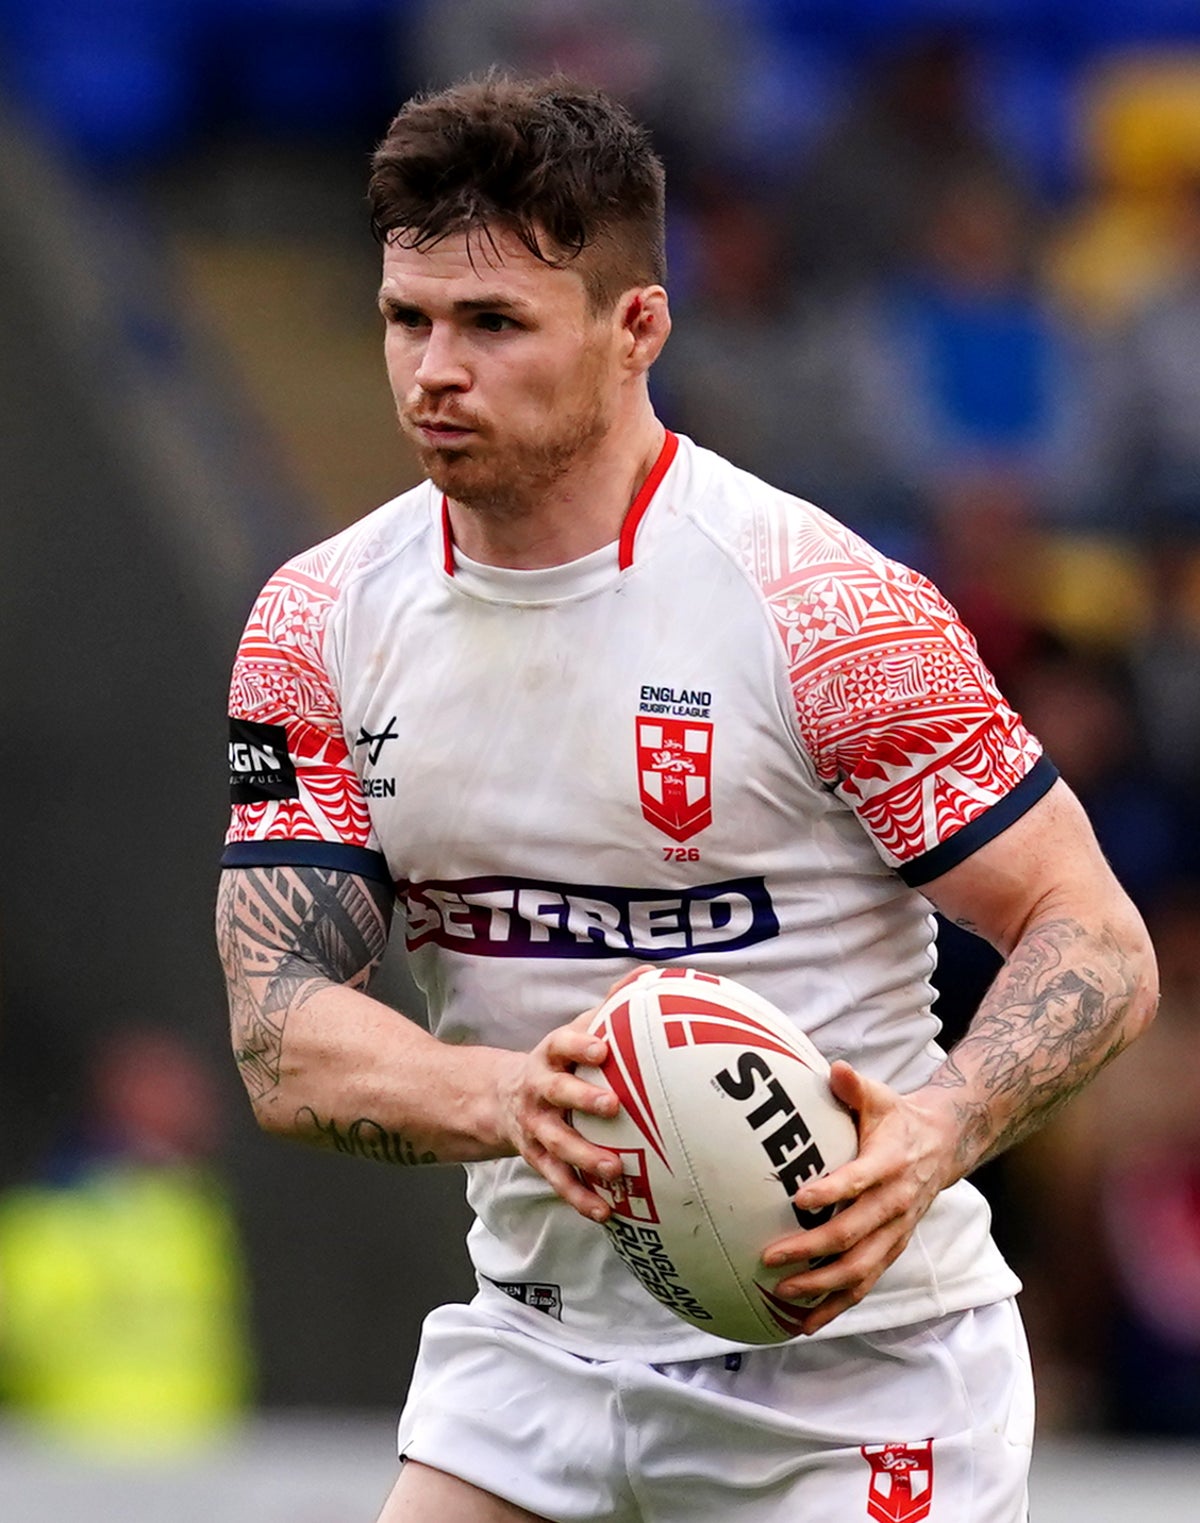 England loose forward John Bateman knows there is still room for improvement